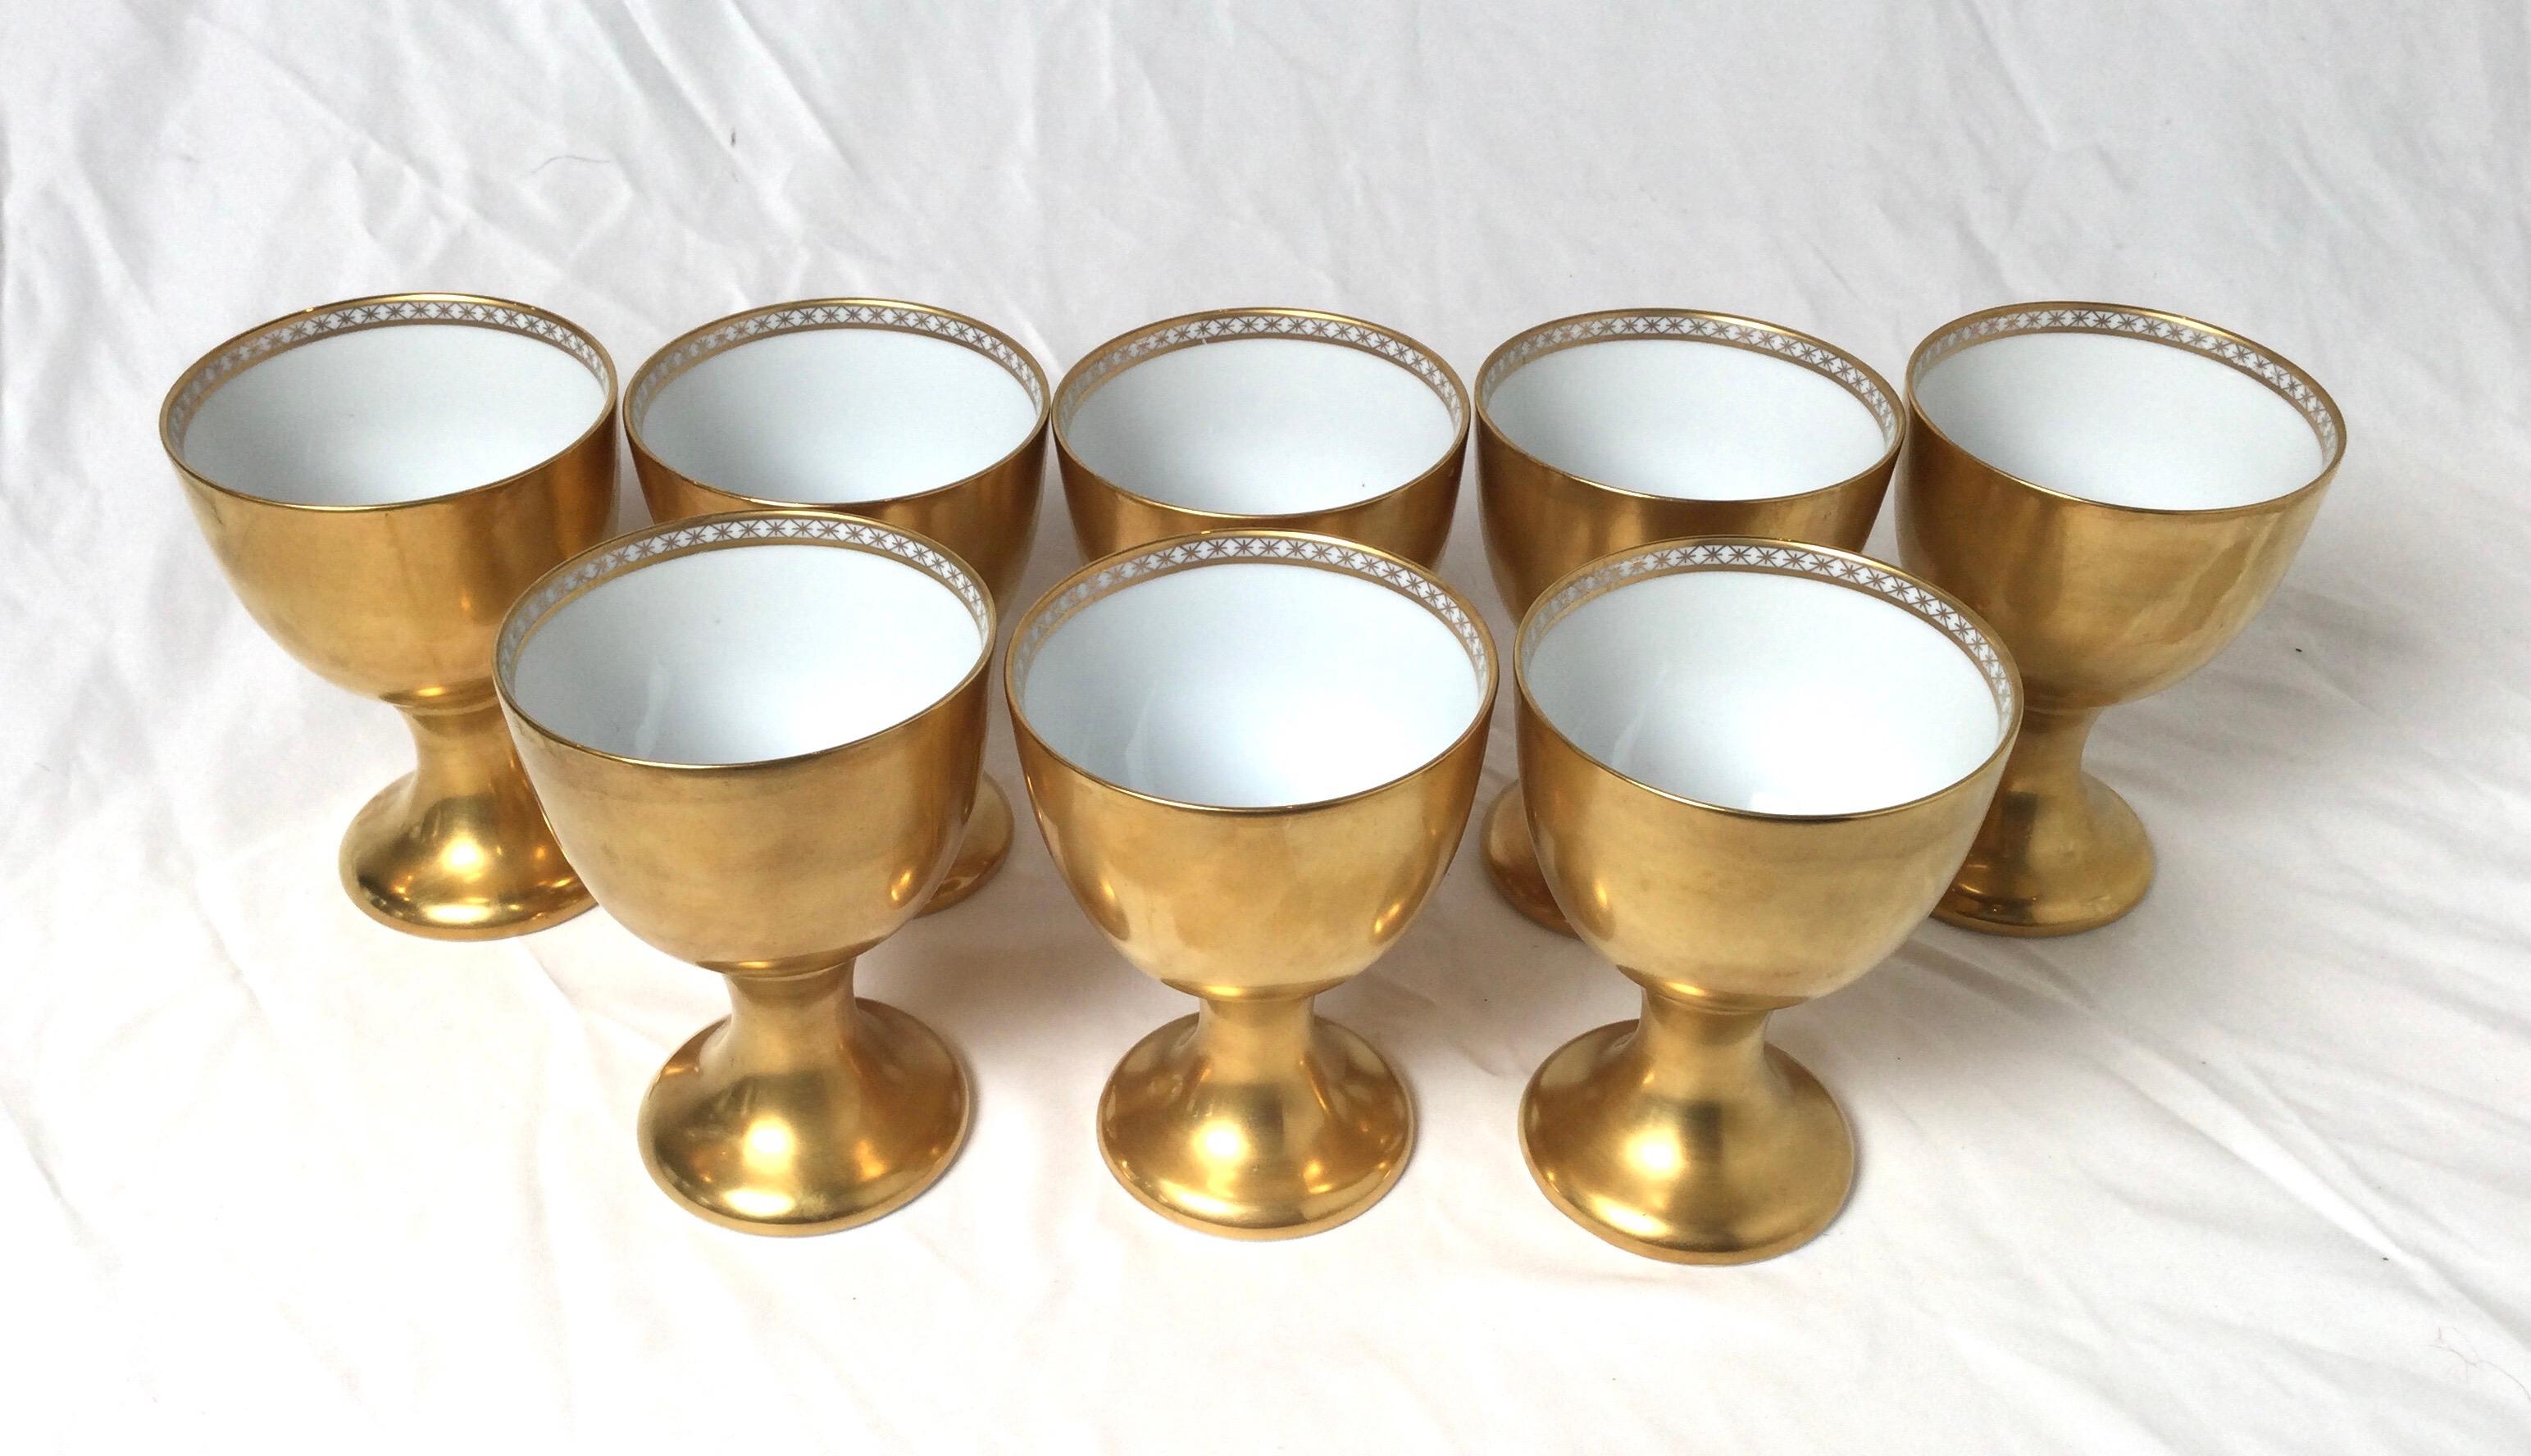 Eight porcelain all over gilt chalice form goblets, by Fitz and Floyd Circa 1978. White porcelain with sold gold decoration.